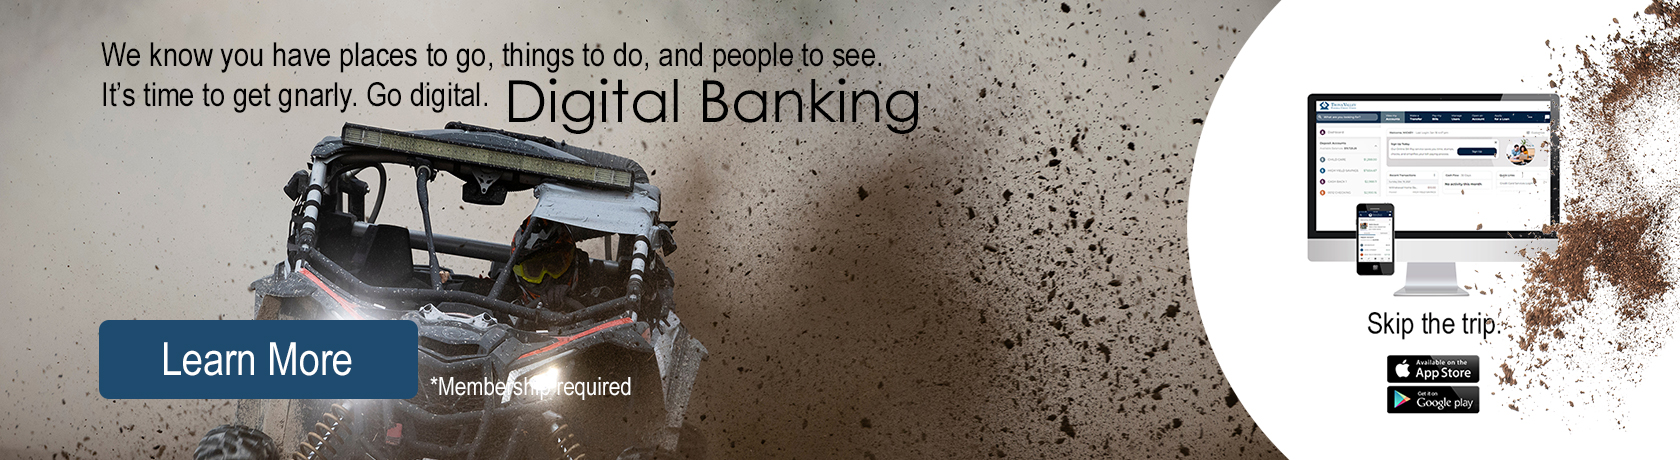 Digital banking is easy, secure, and convenient.